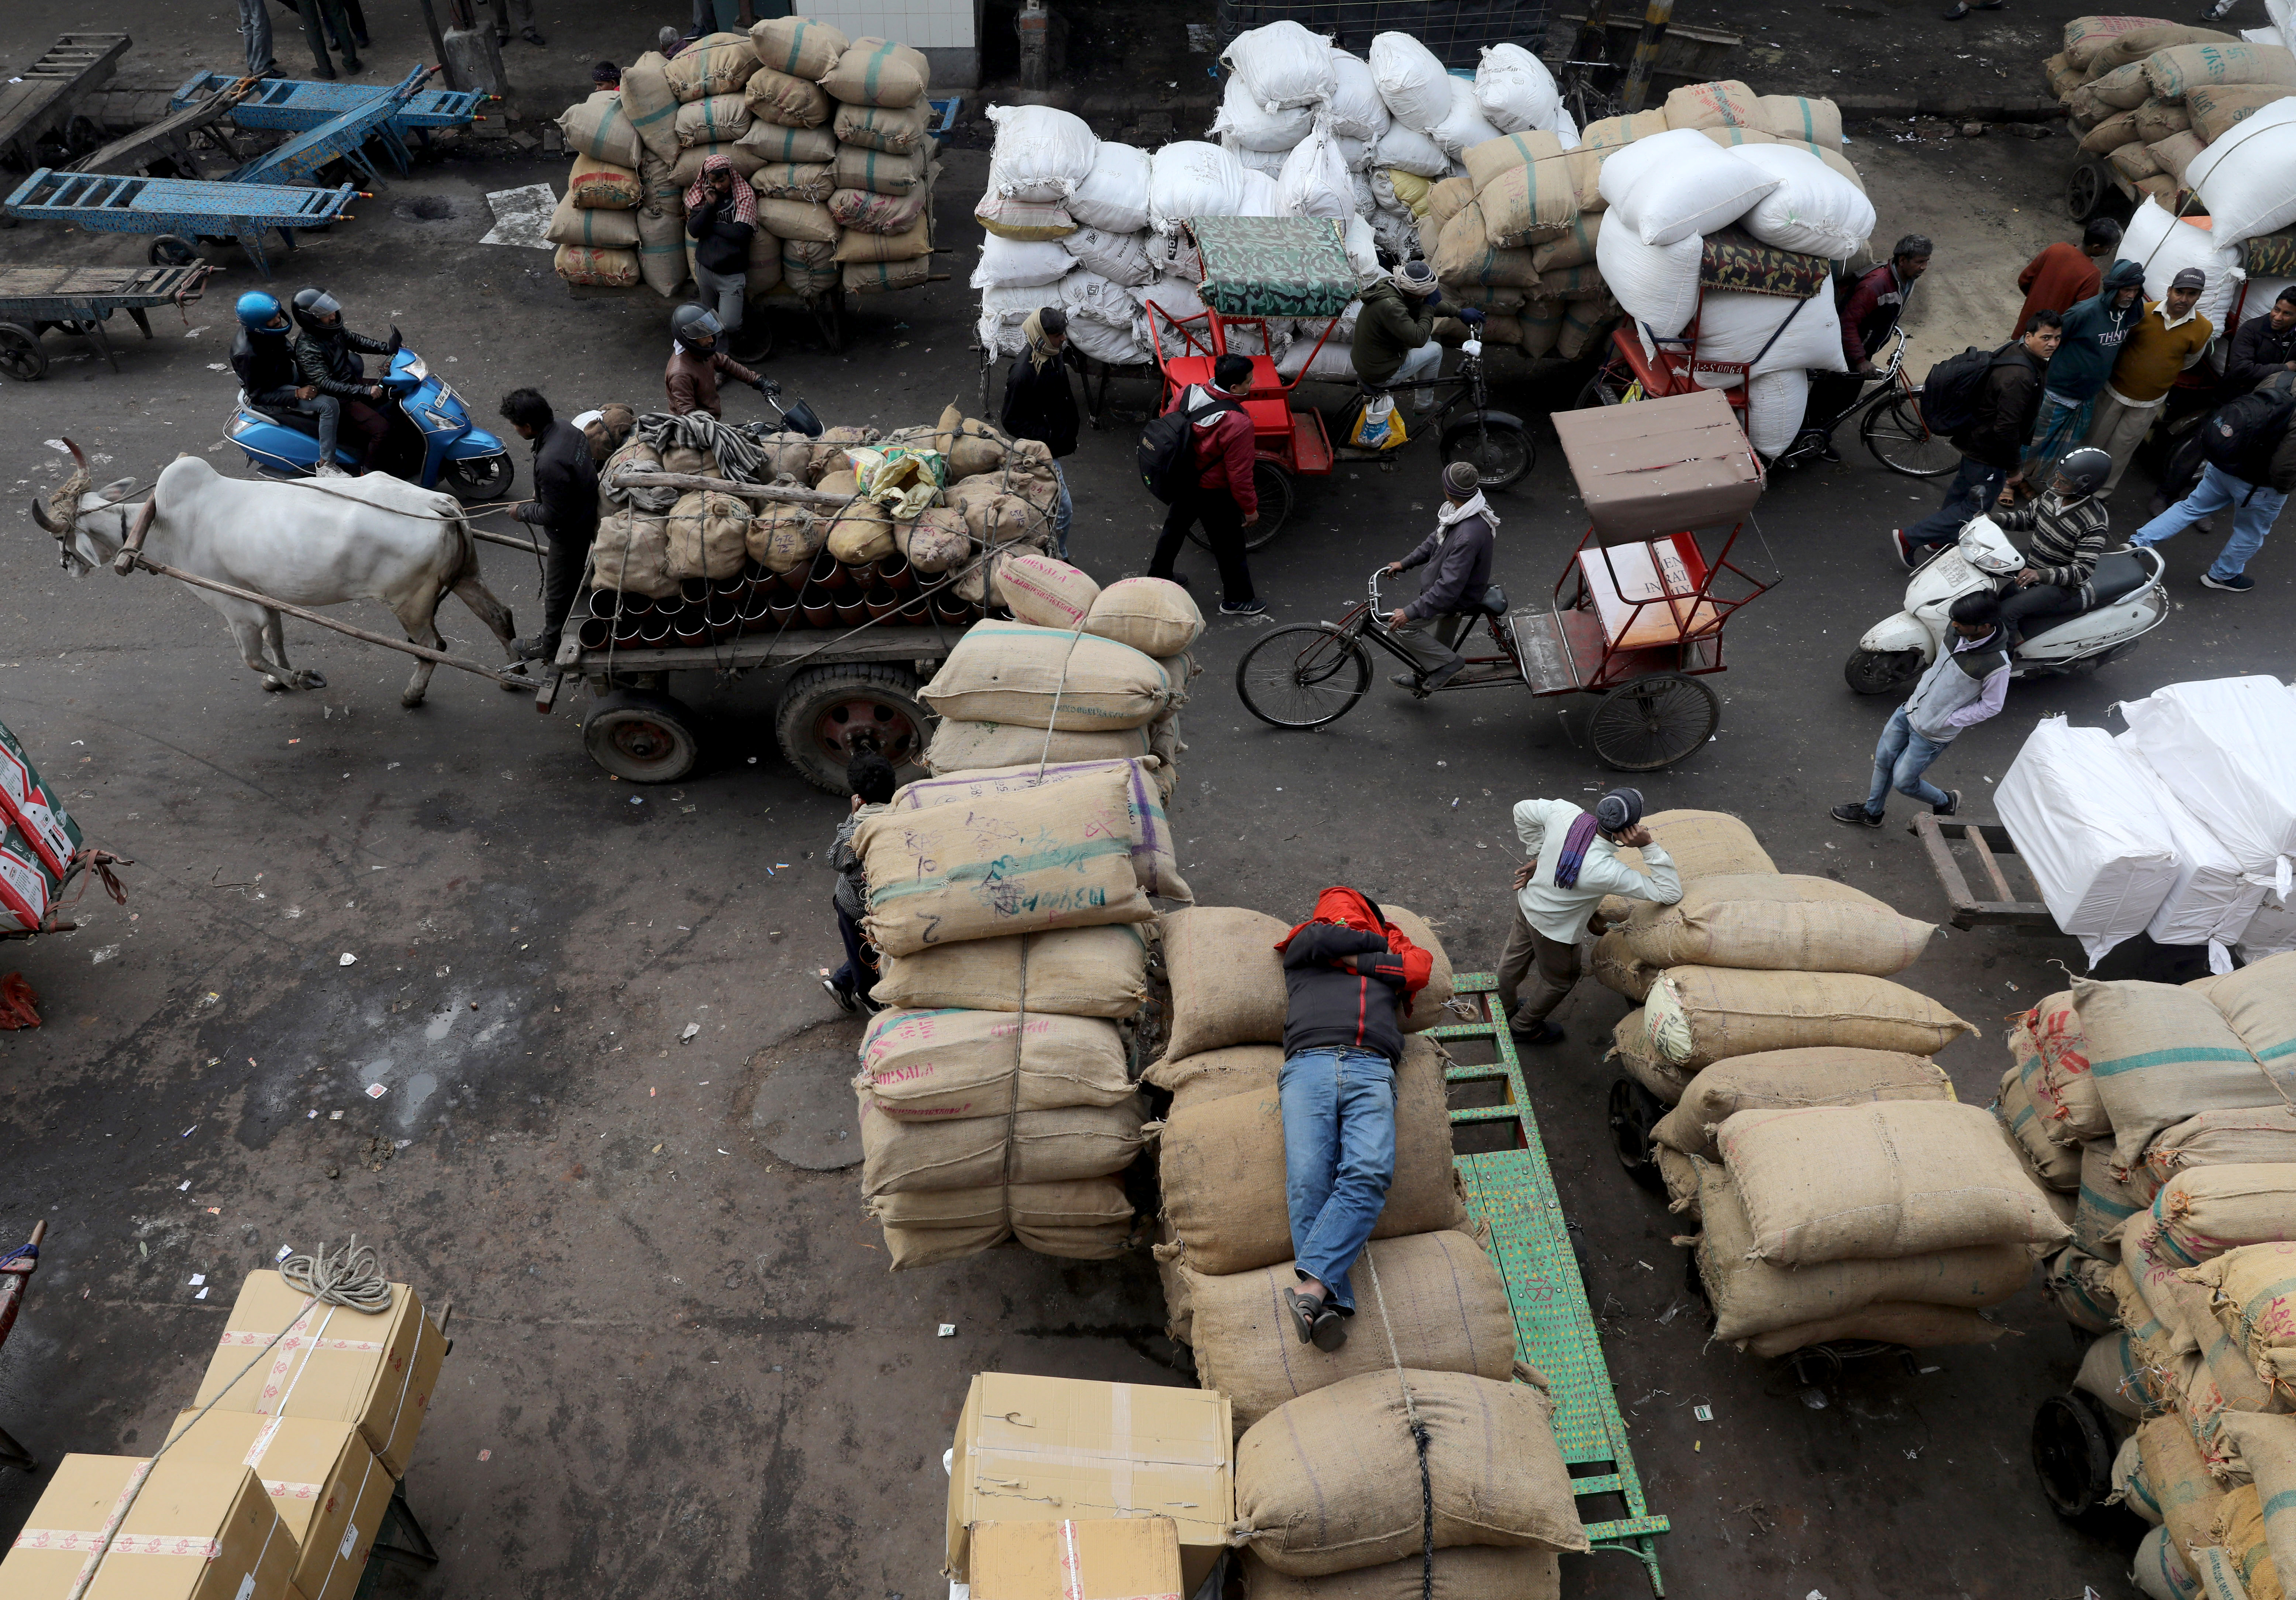 A labourer sleeps on sacks as traffic moves past him in a wholesale market in the old quarters of Delhi, India, January 7, 2020. REUTERS/Anushree Fadnavis